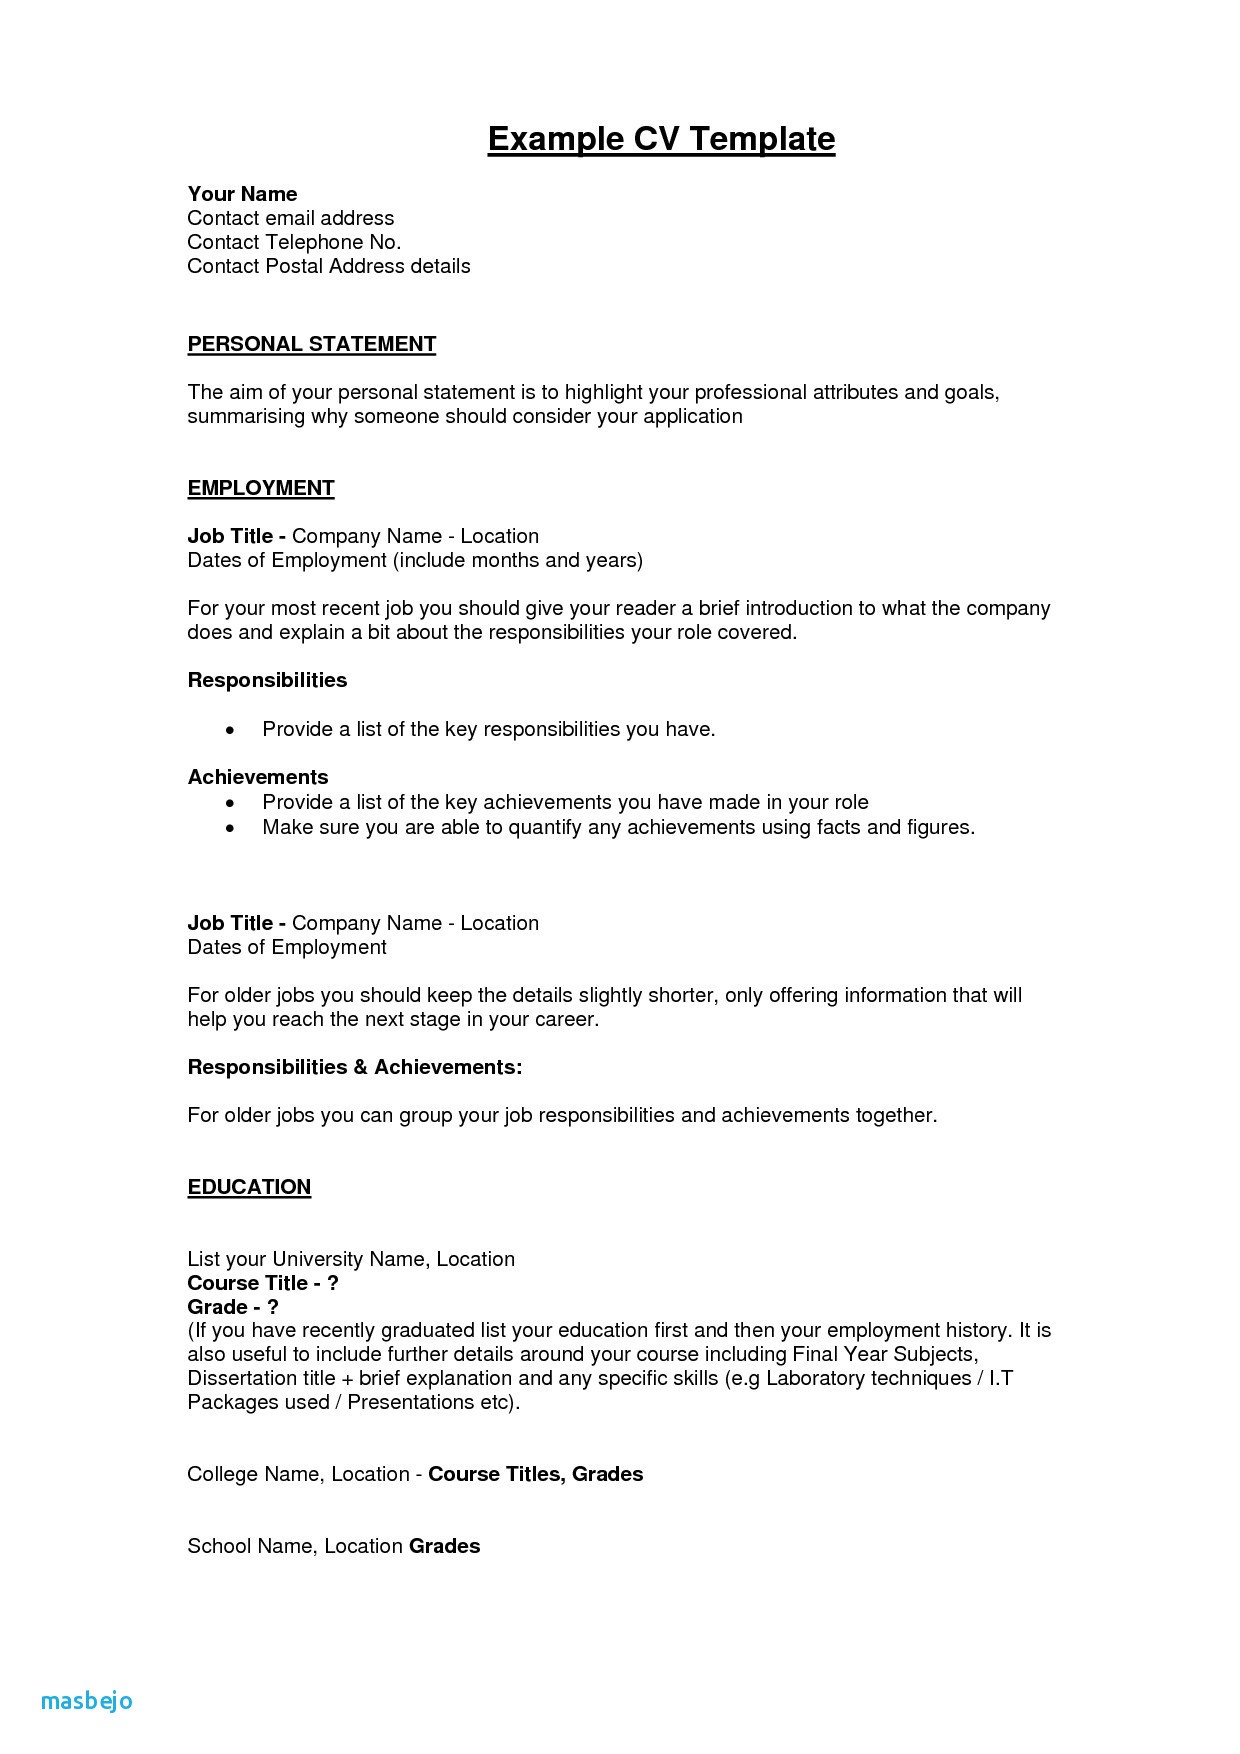 How To Write A Good Resume Proper Way To Write Resume How Cover Letter Right Out Of High School For Internship Correct how to write a good resume|wikiresume.com